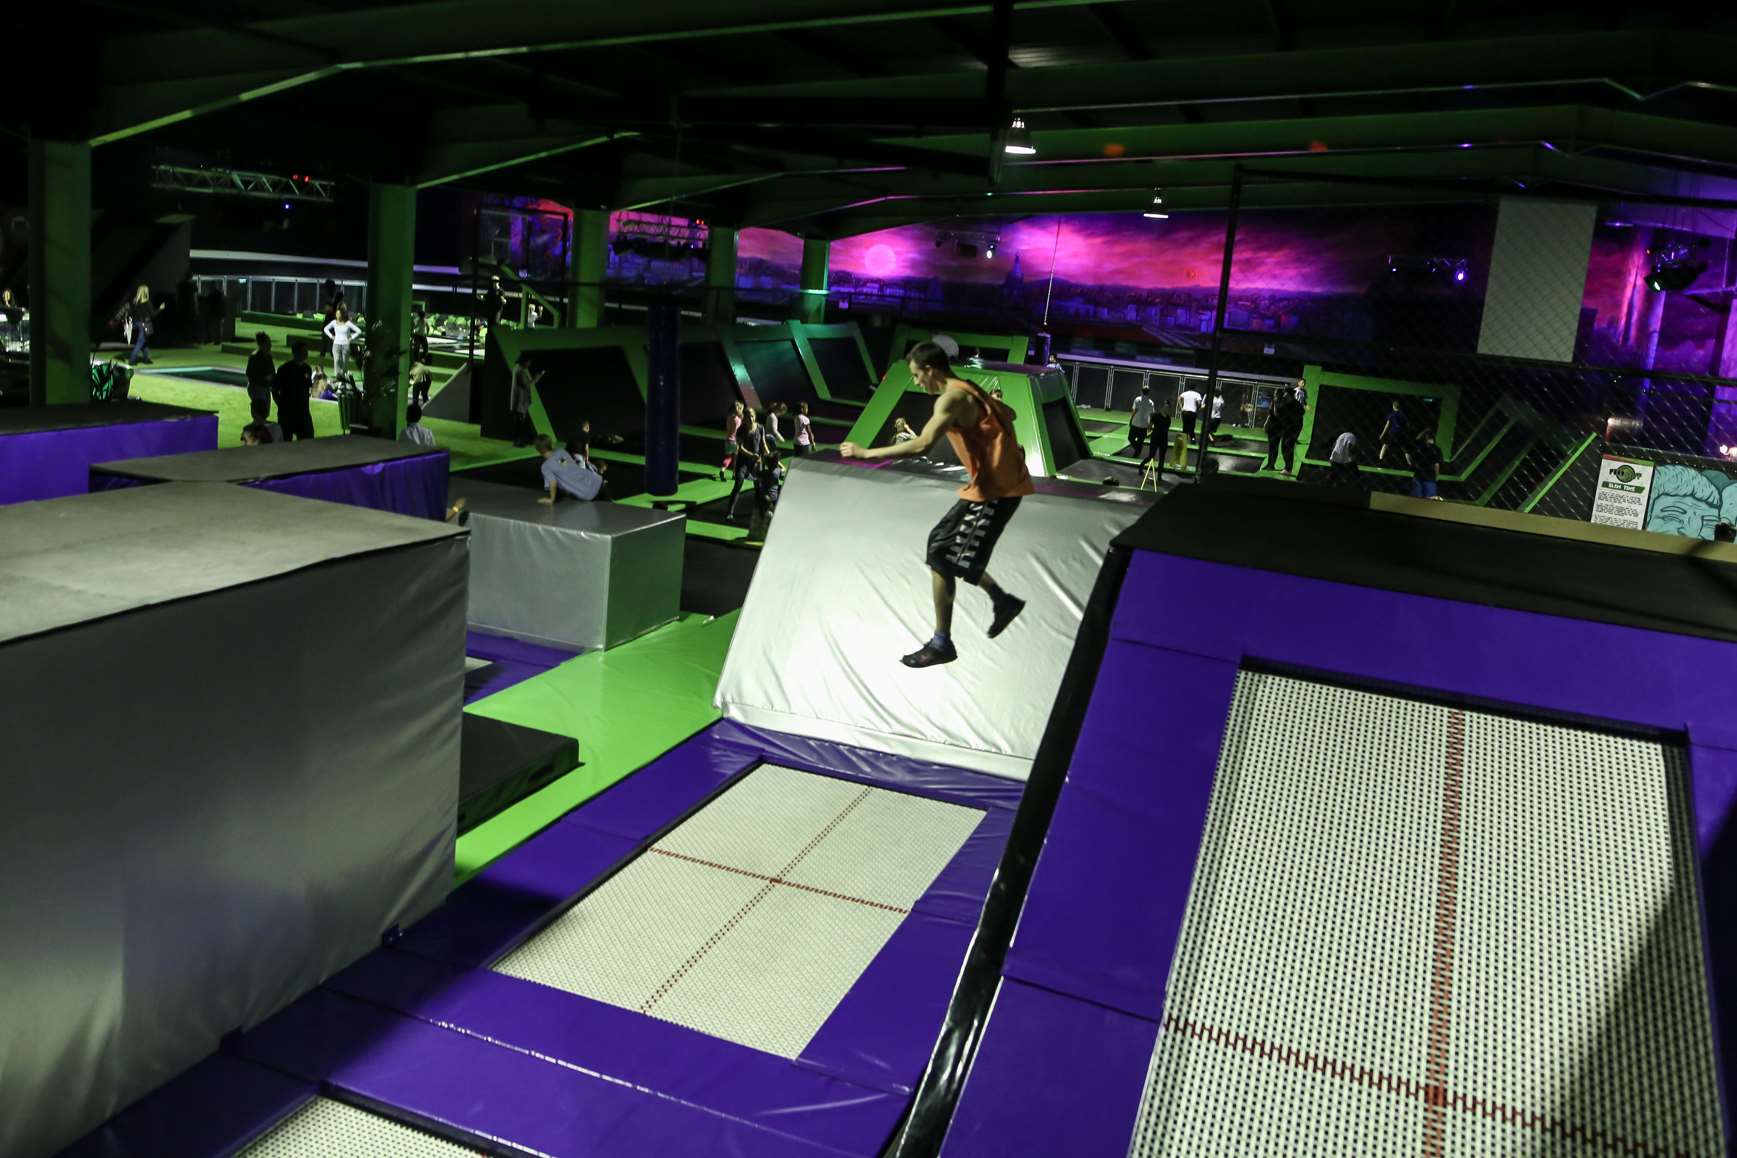 One of the biggest trampolining arenas in Kent is opening in Ashford next month